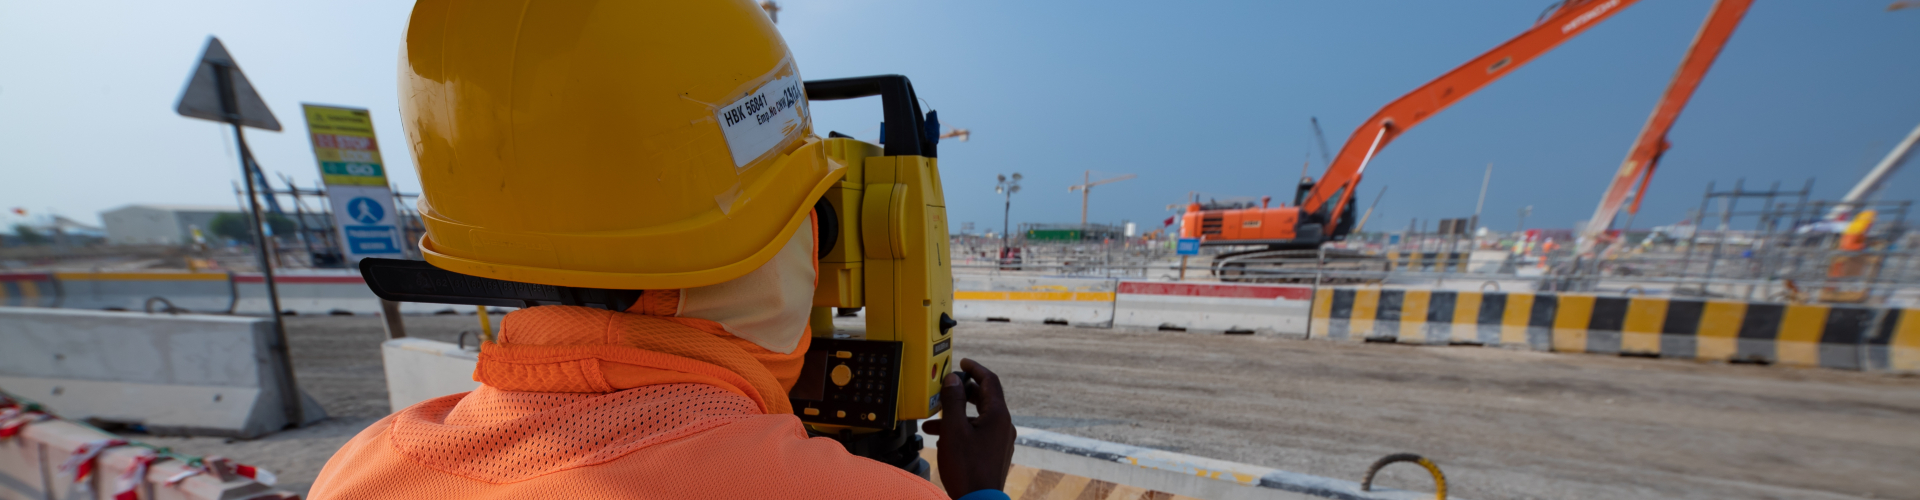 QPEC has been appointed as a sub-contractor to manage electrical installations at four Qatar 2022 stadiums